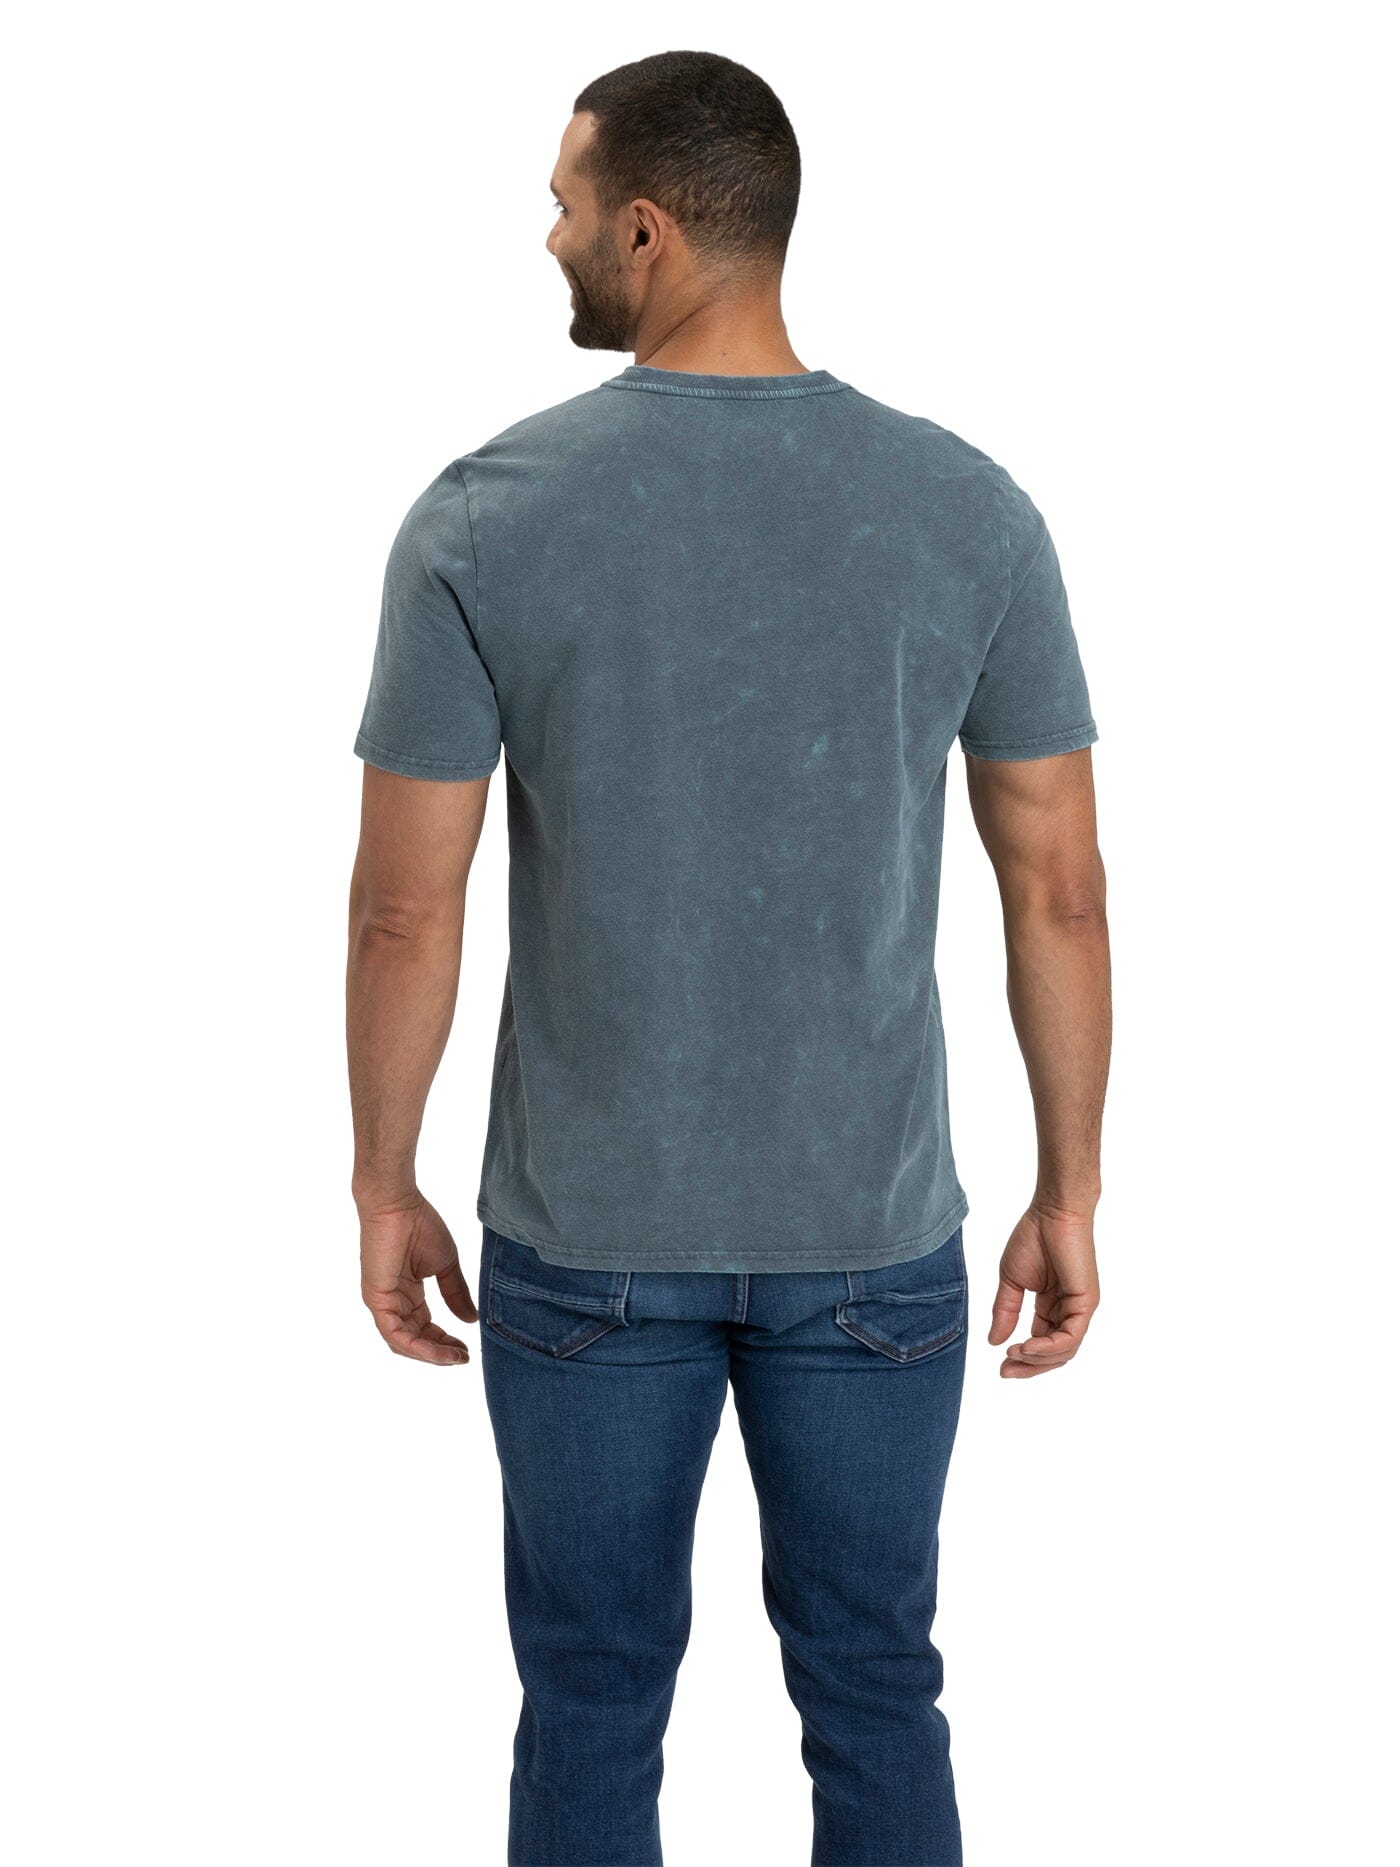 Mineral Wash Jersey V-Neck Tee Mens Tops Tshirt Short Threads 4 Thought 